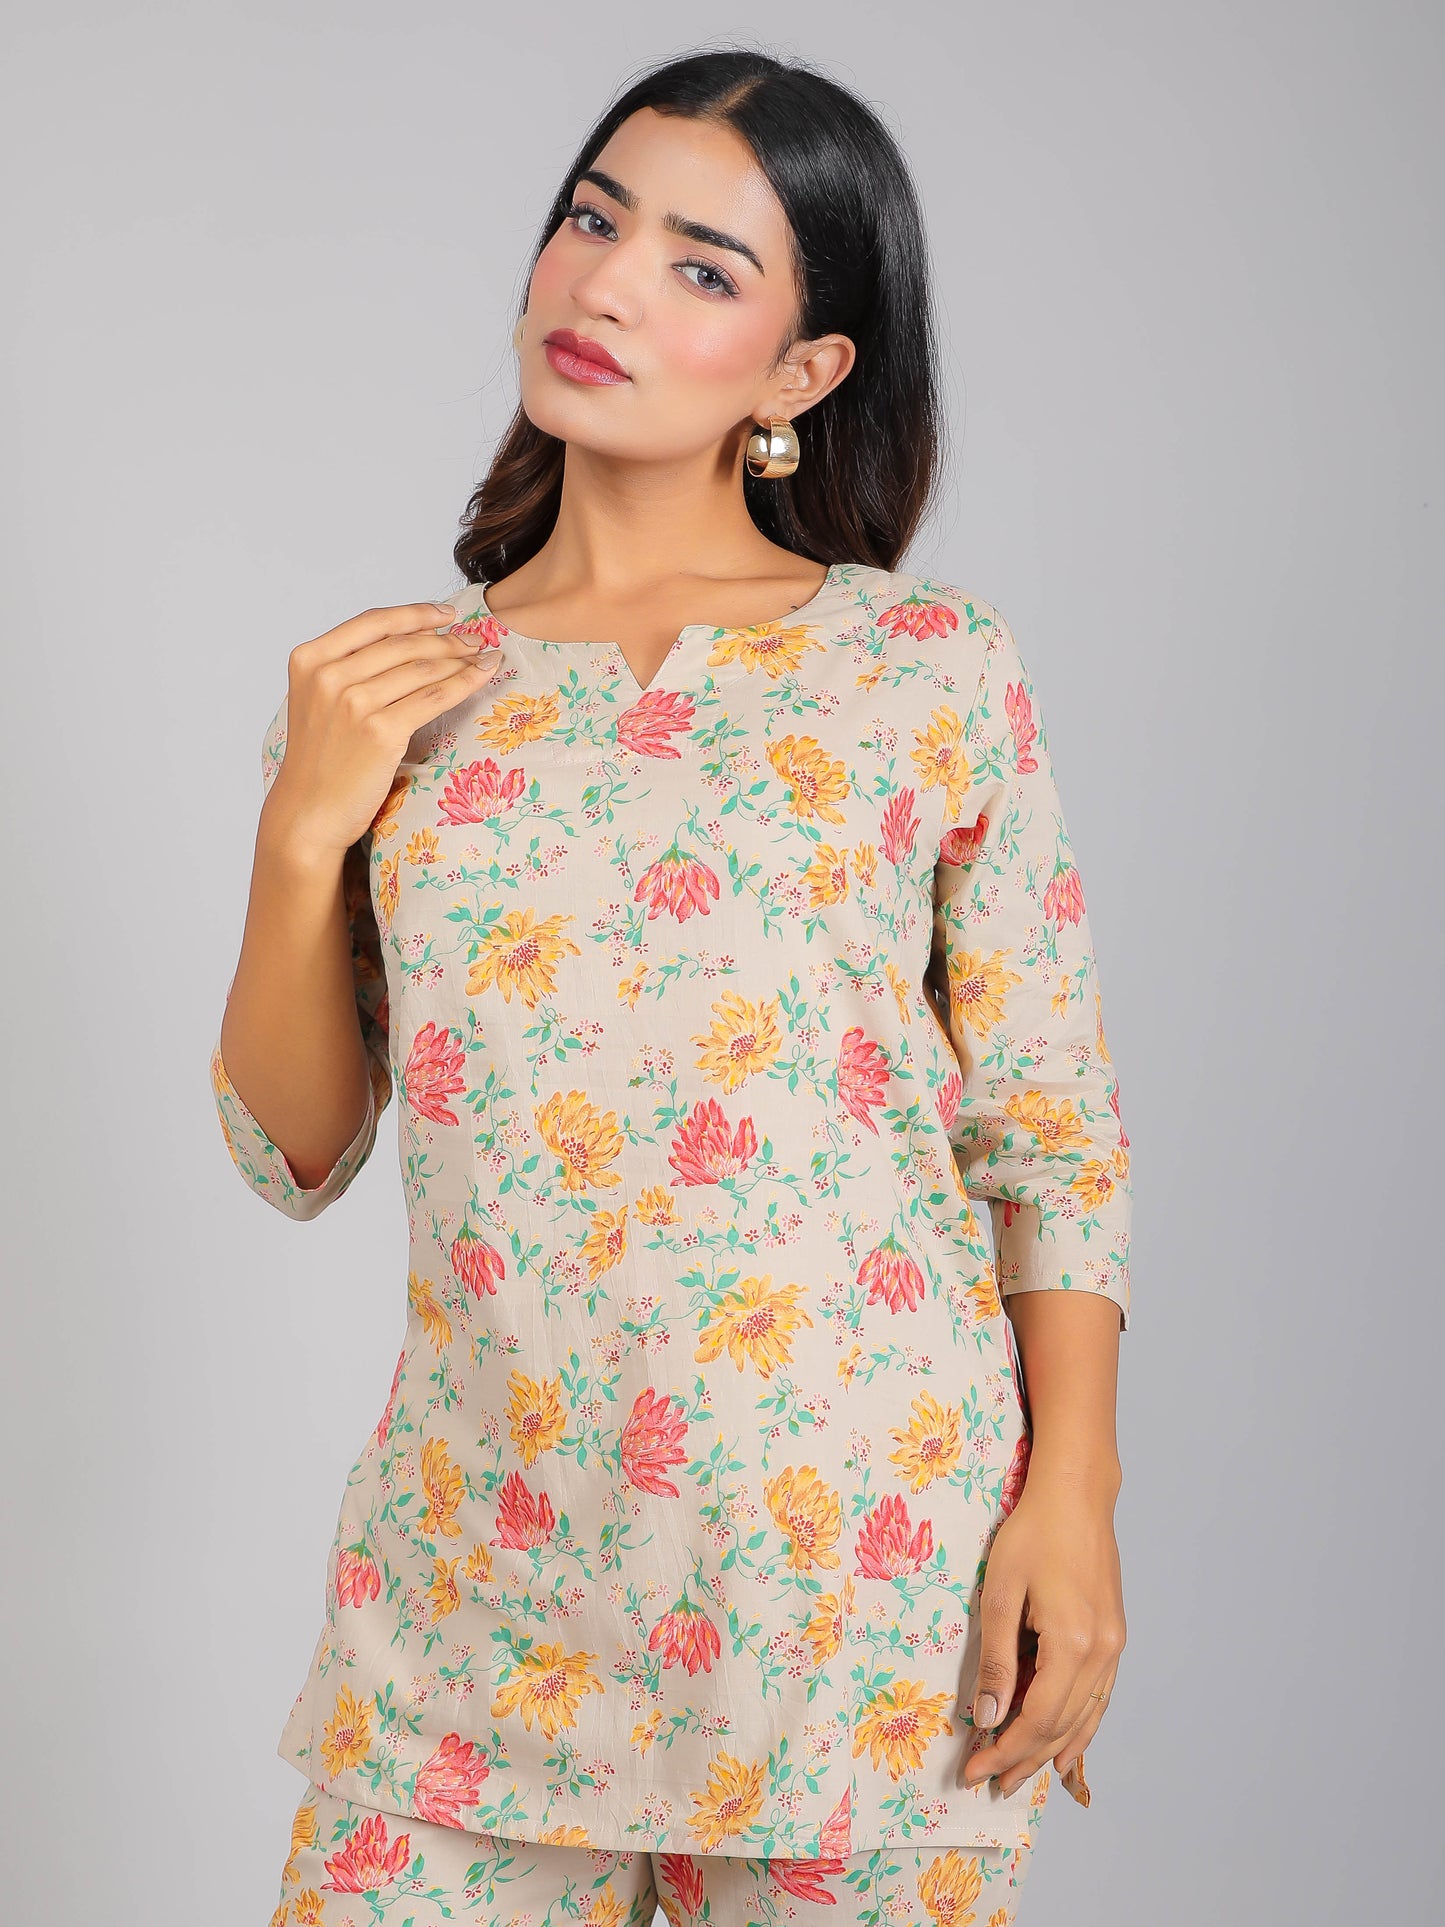 Floral Print on Grey Cotton Lounge Set for Women